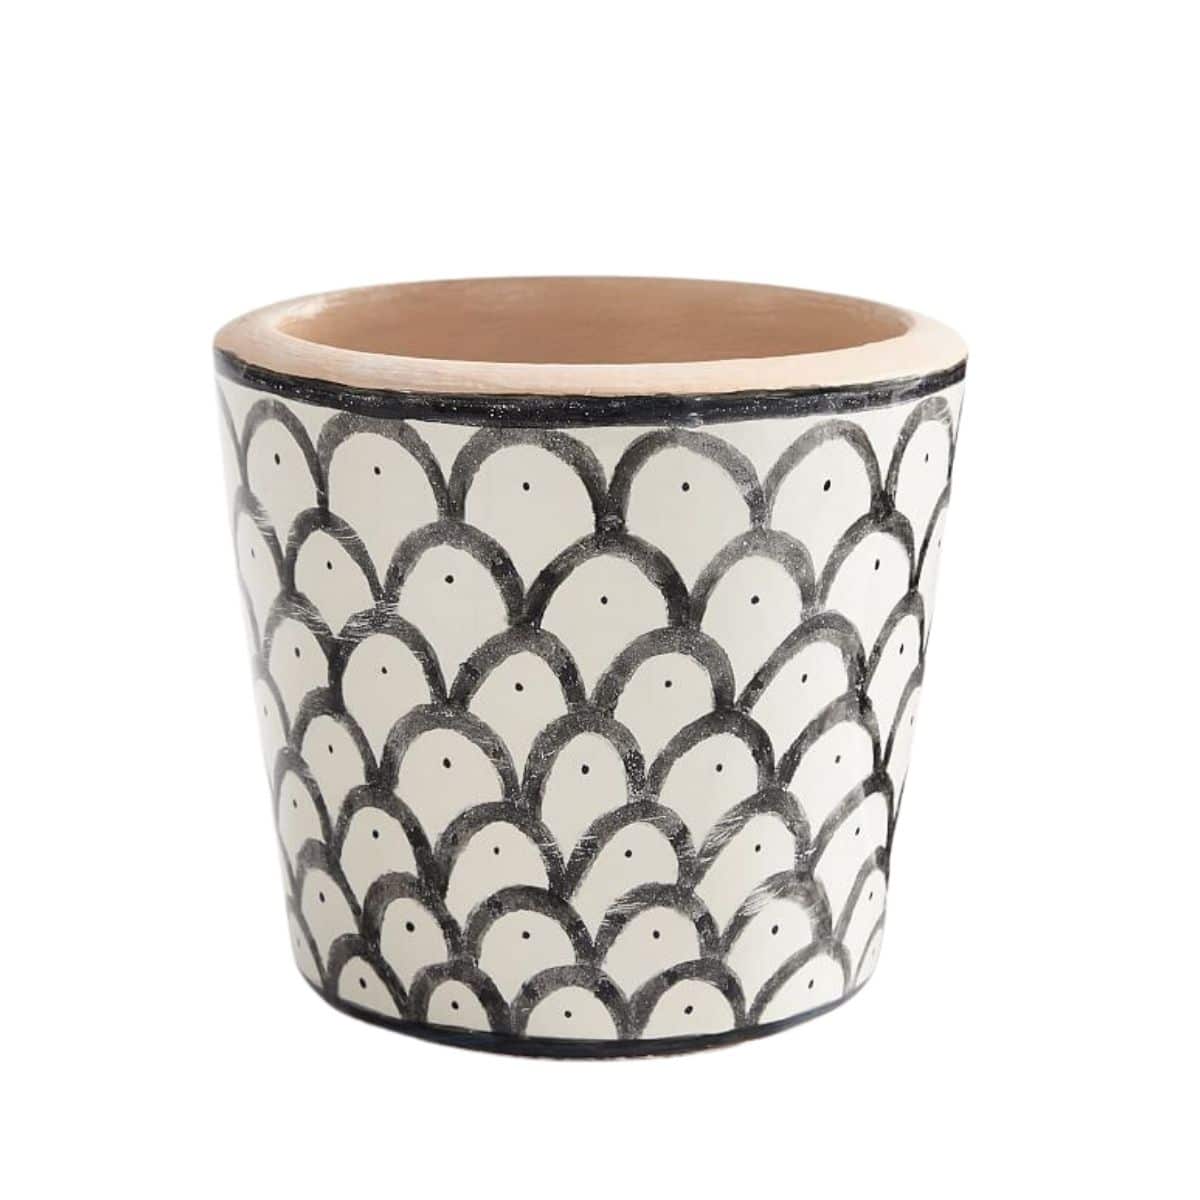 Marrakesh style Terracotta Planters with white and black scallop design from Pottery Barn. 